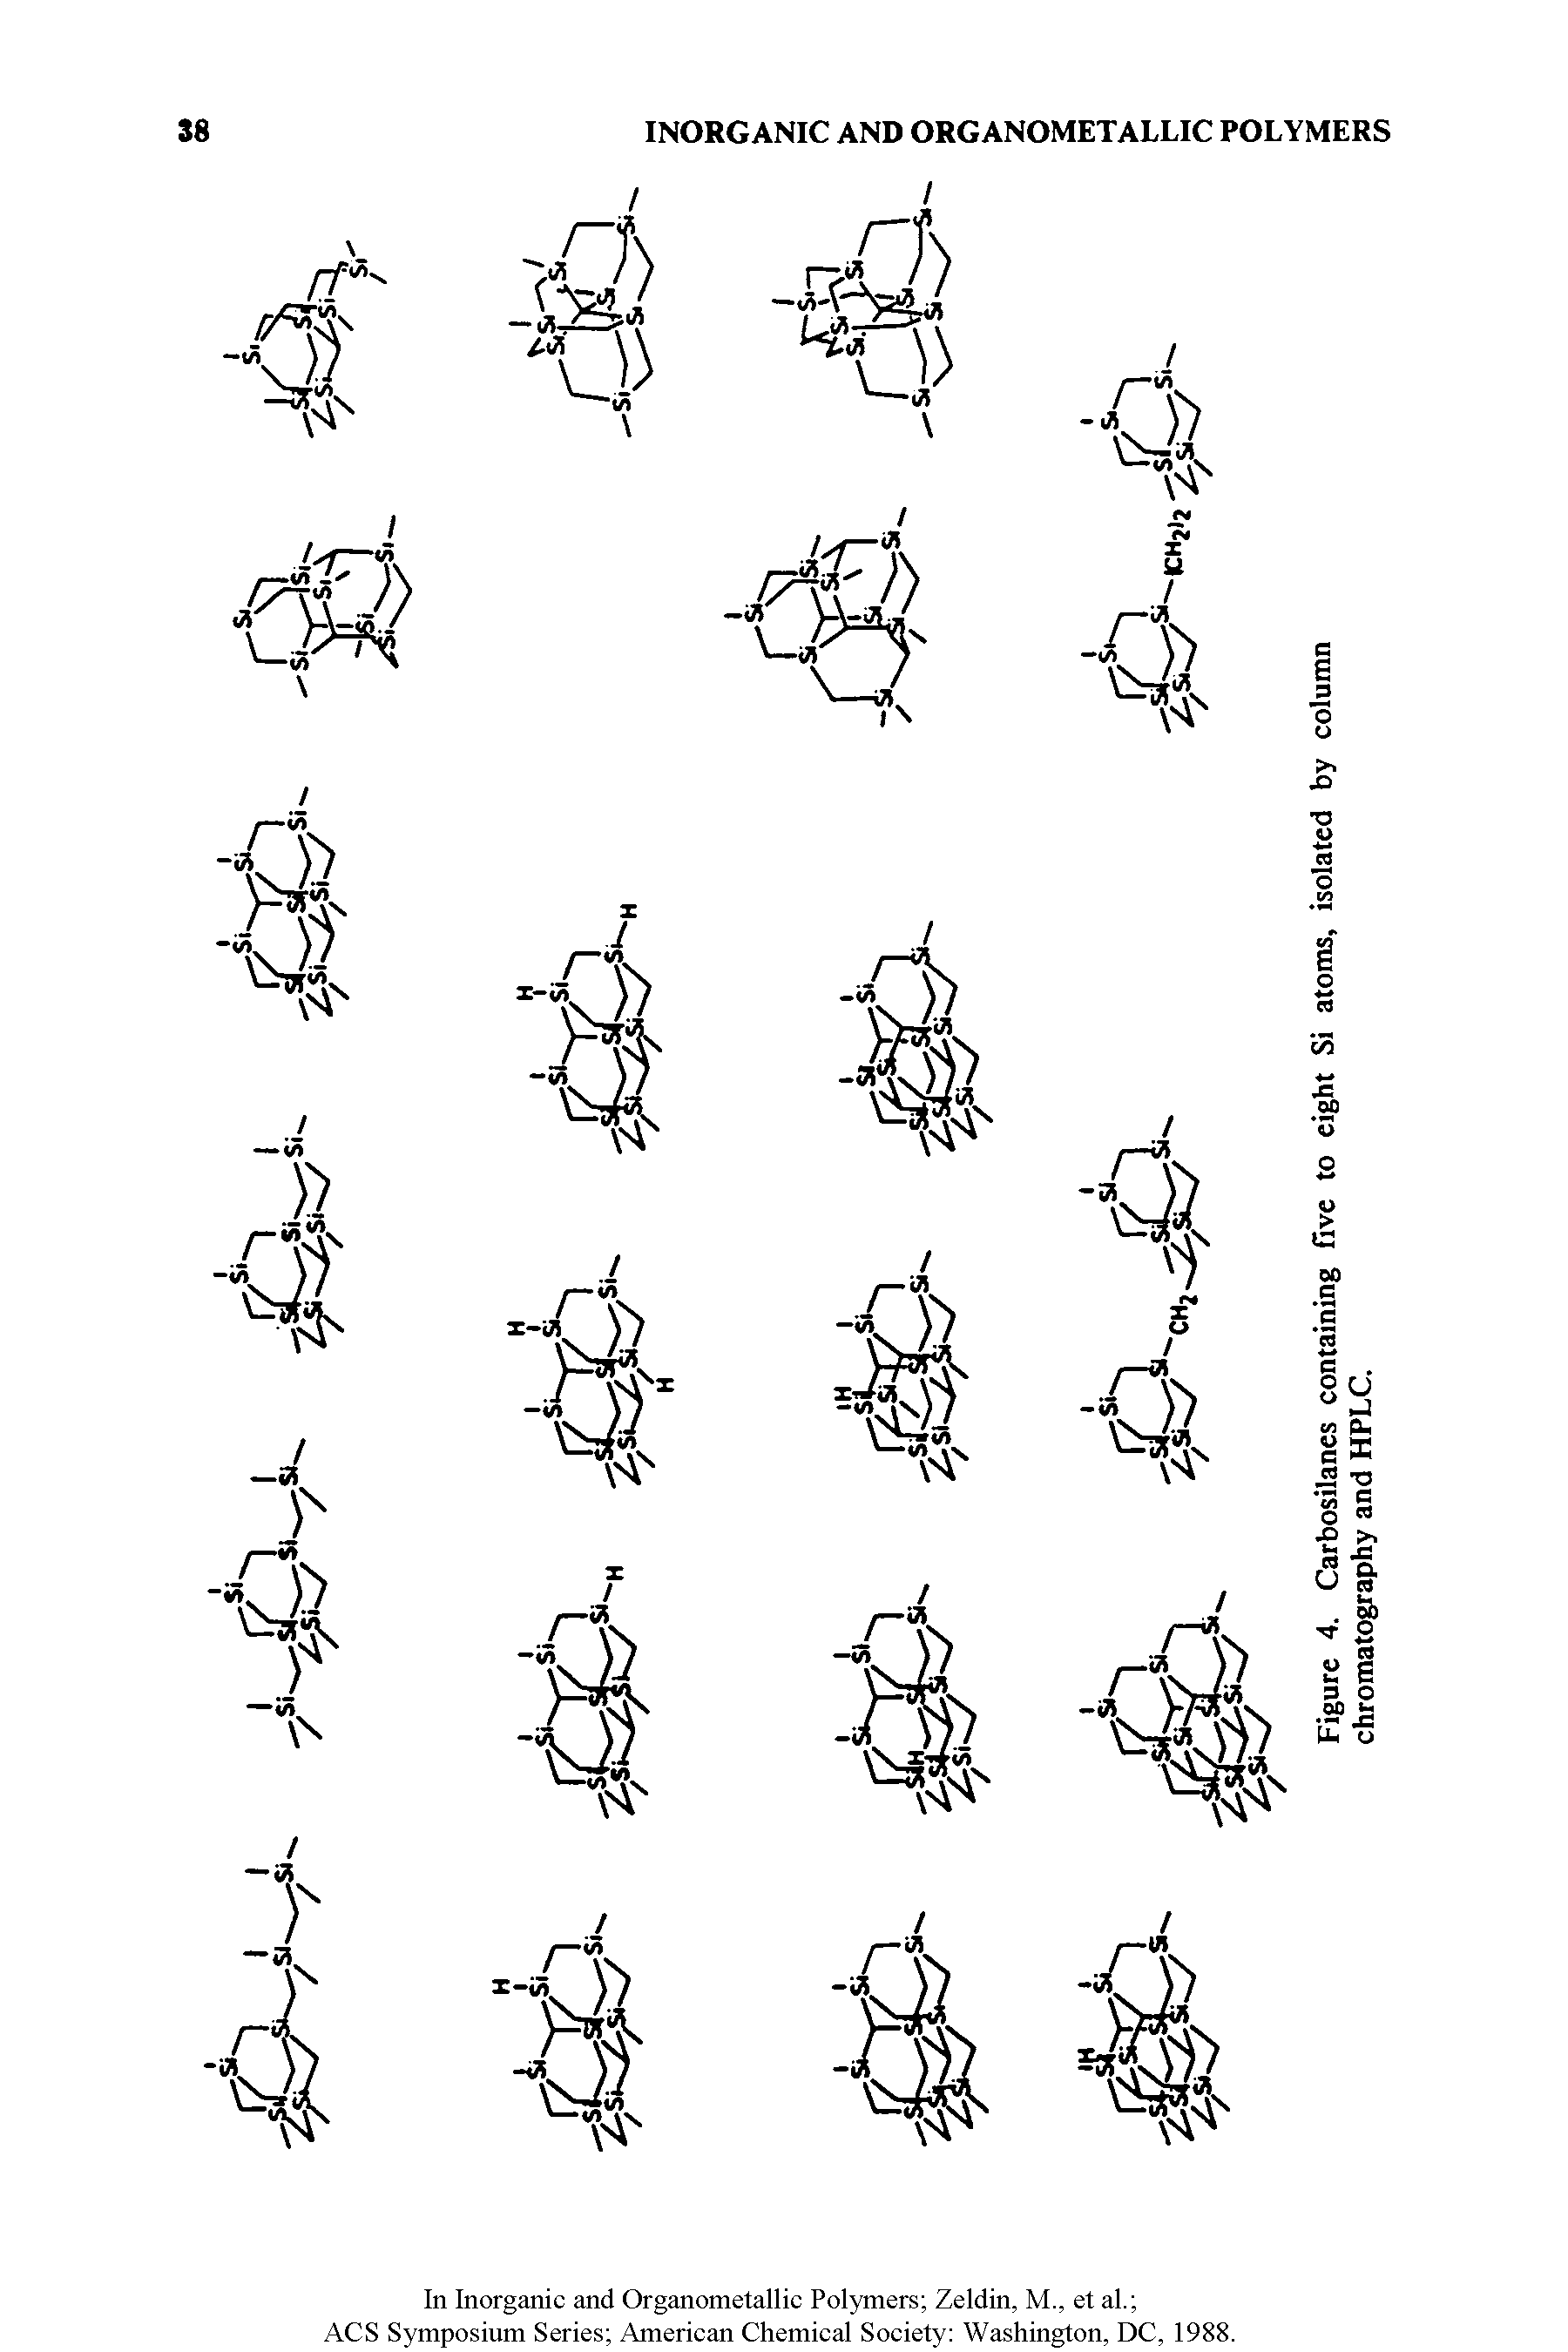 Figure 4. Carbosilanes containing five to eight Si atoms, isolated by column chromatography and HPLC.